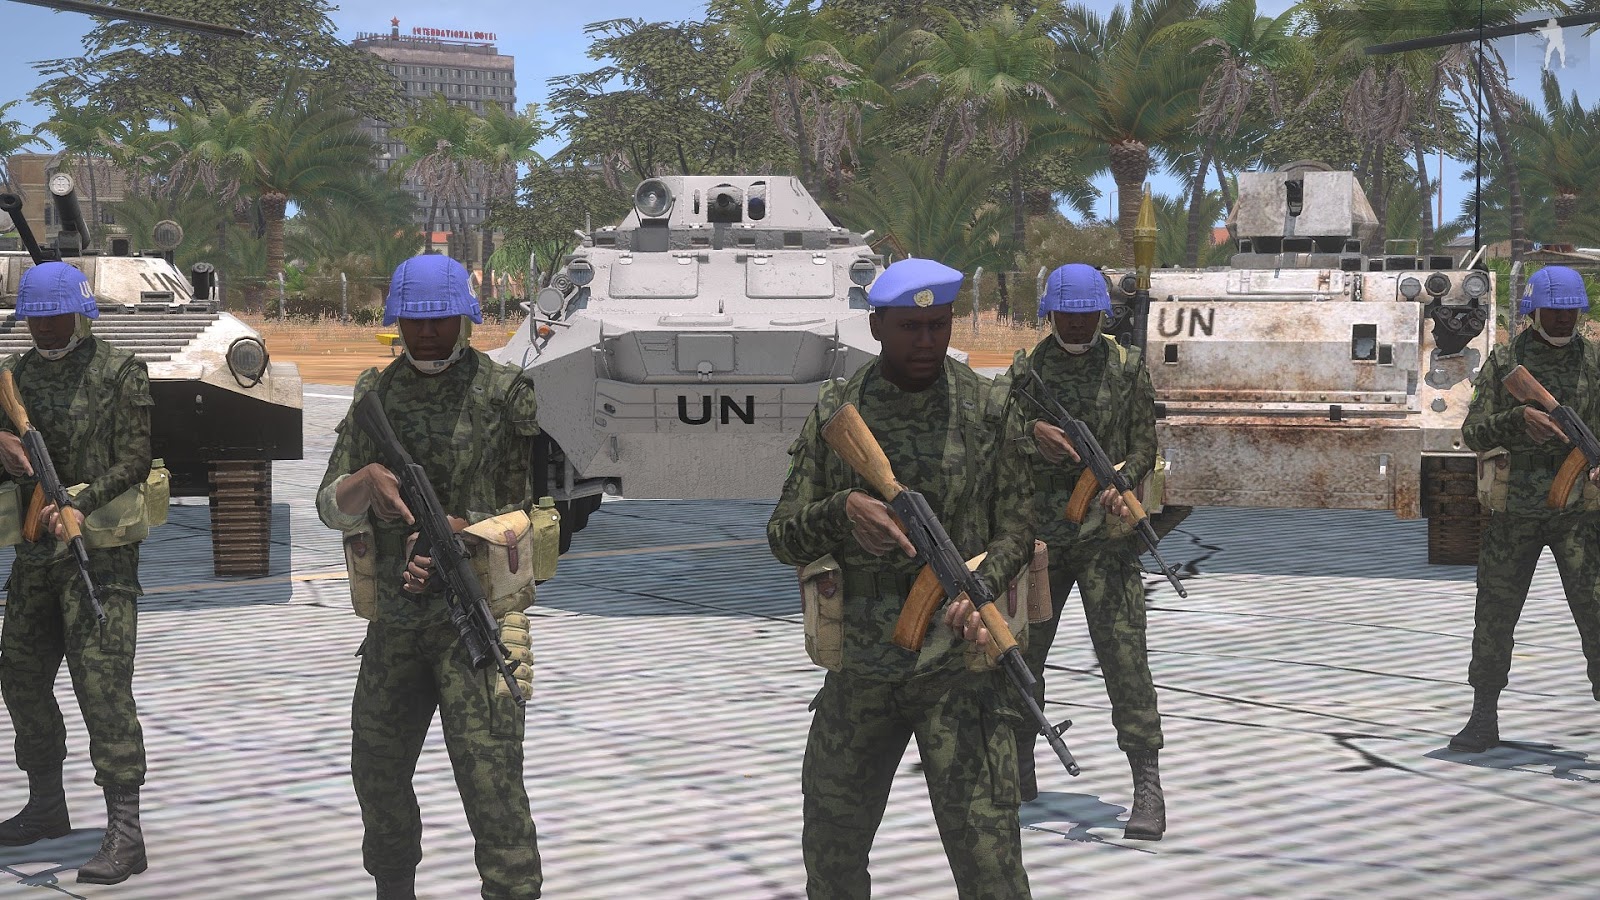 Юнит арма. Arma 3 African Factions. Dev Cup Weapons. Cup Weapons.